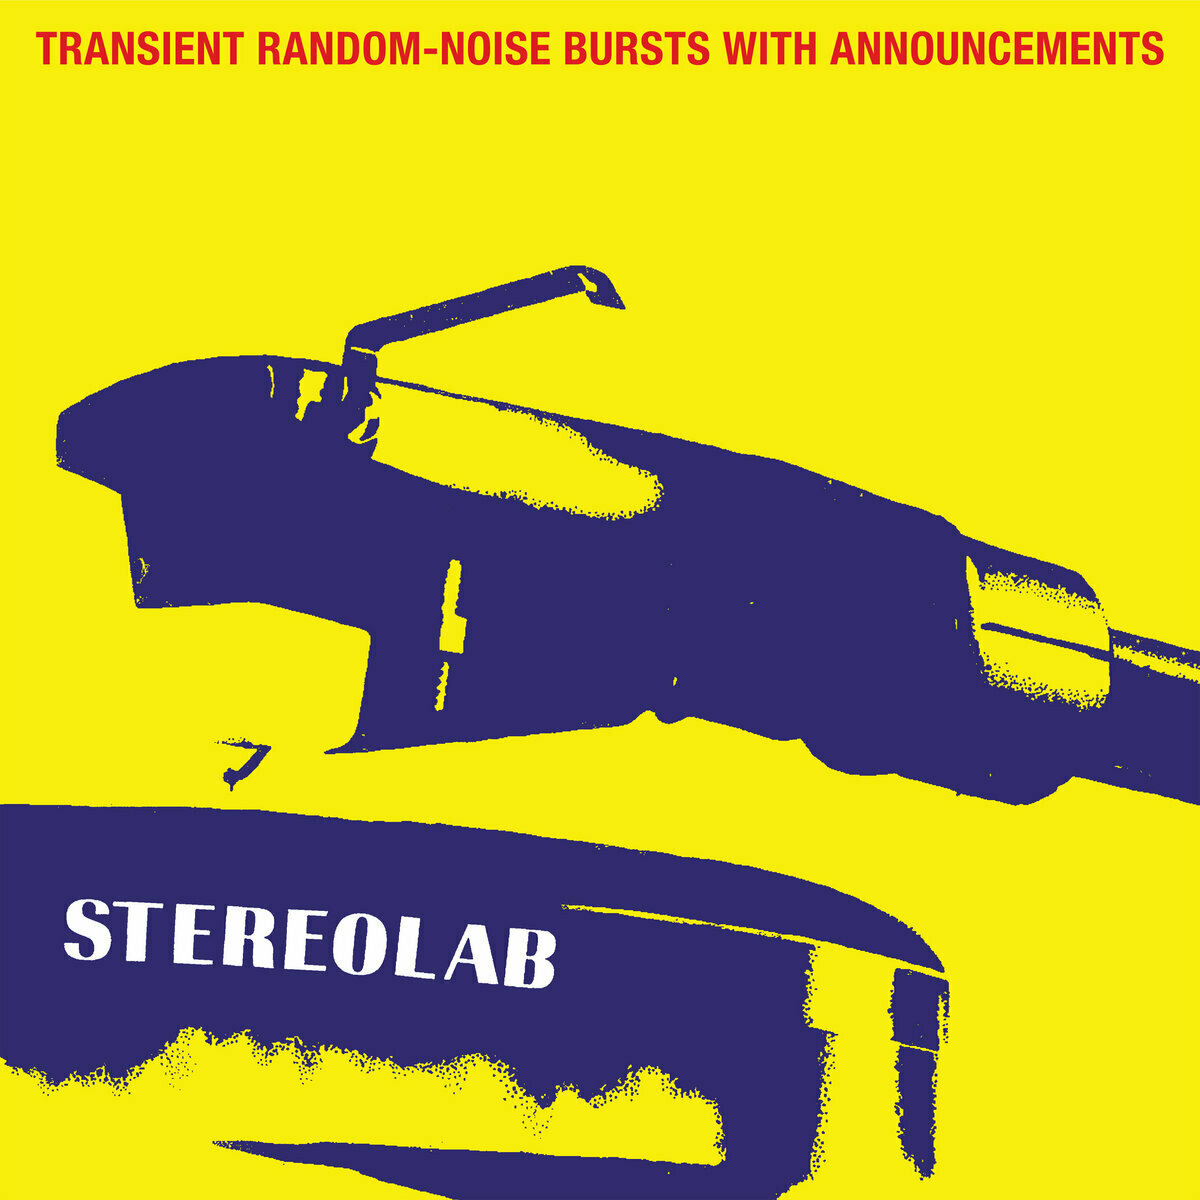 Stereolab "Transient Radom Noise Bursts With Announcements"